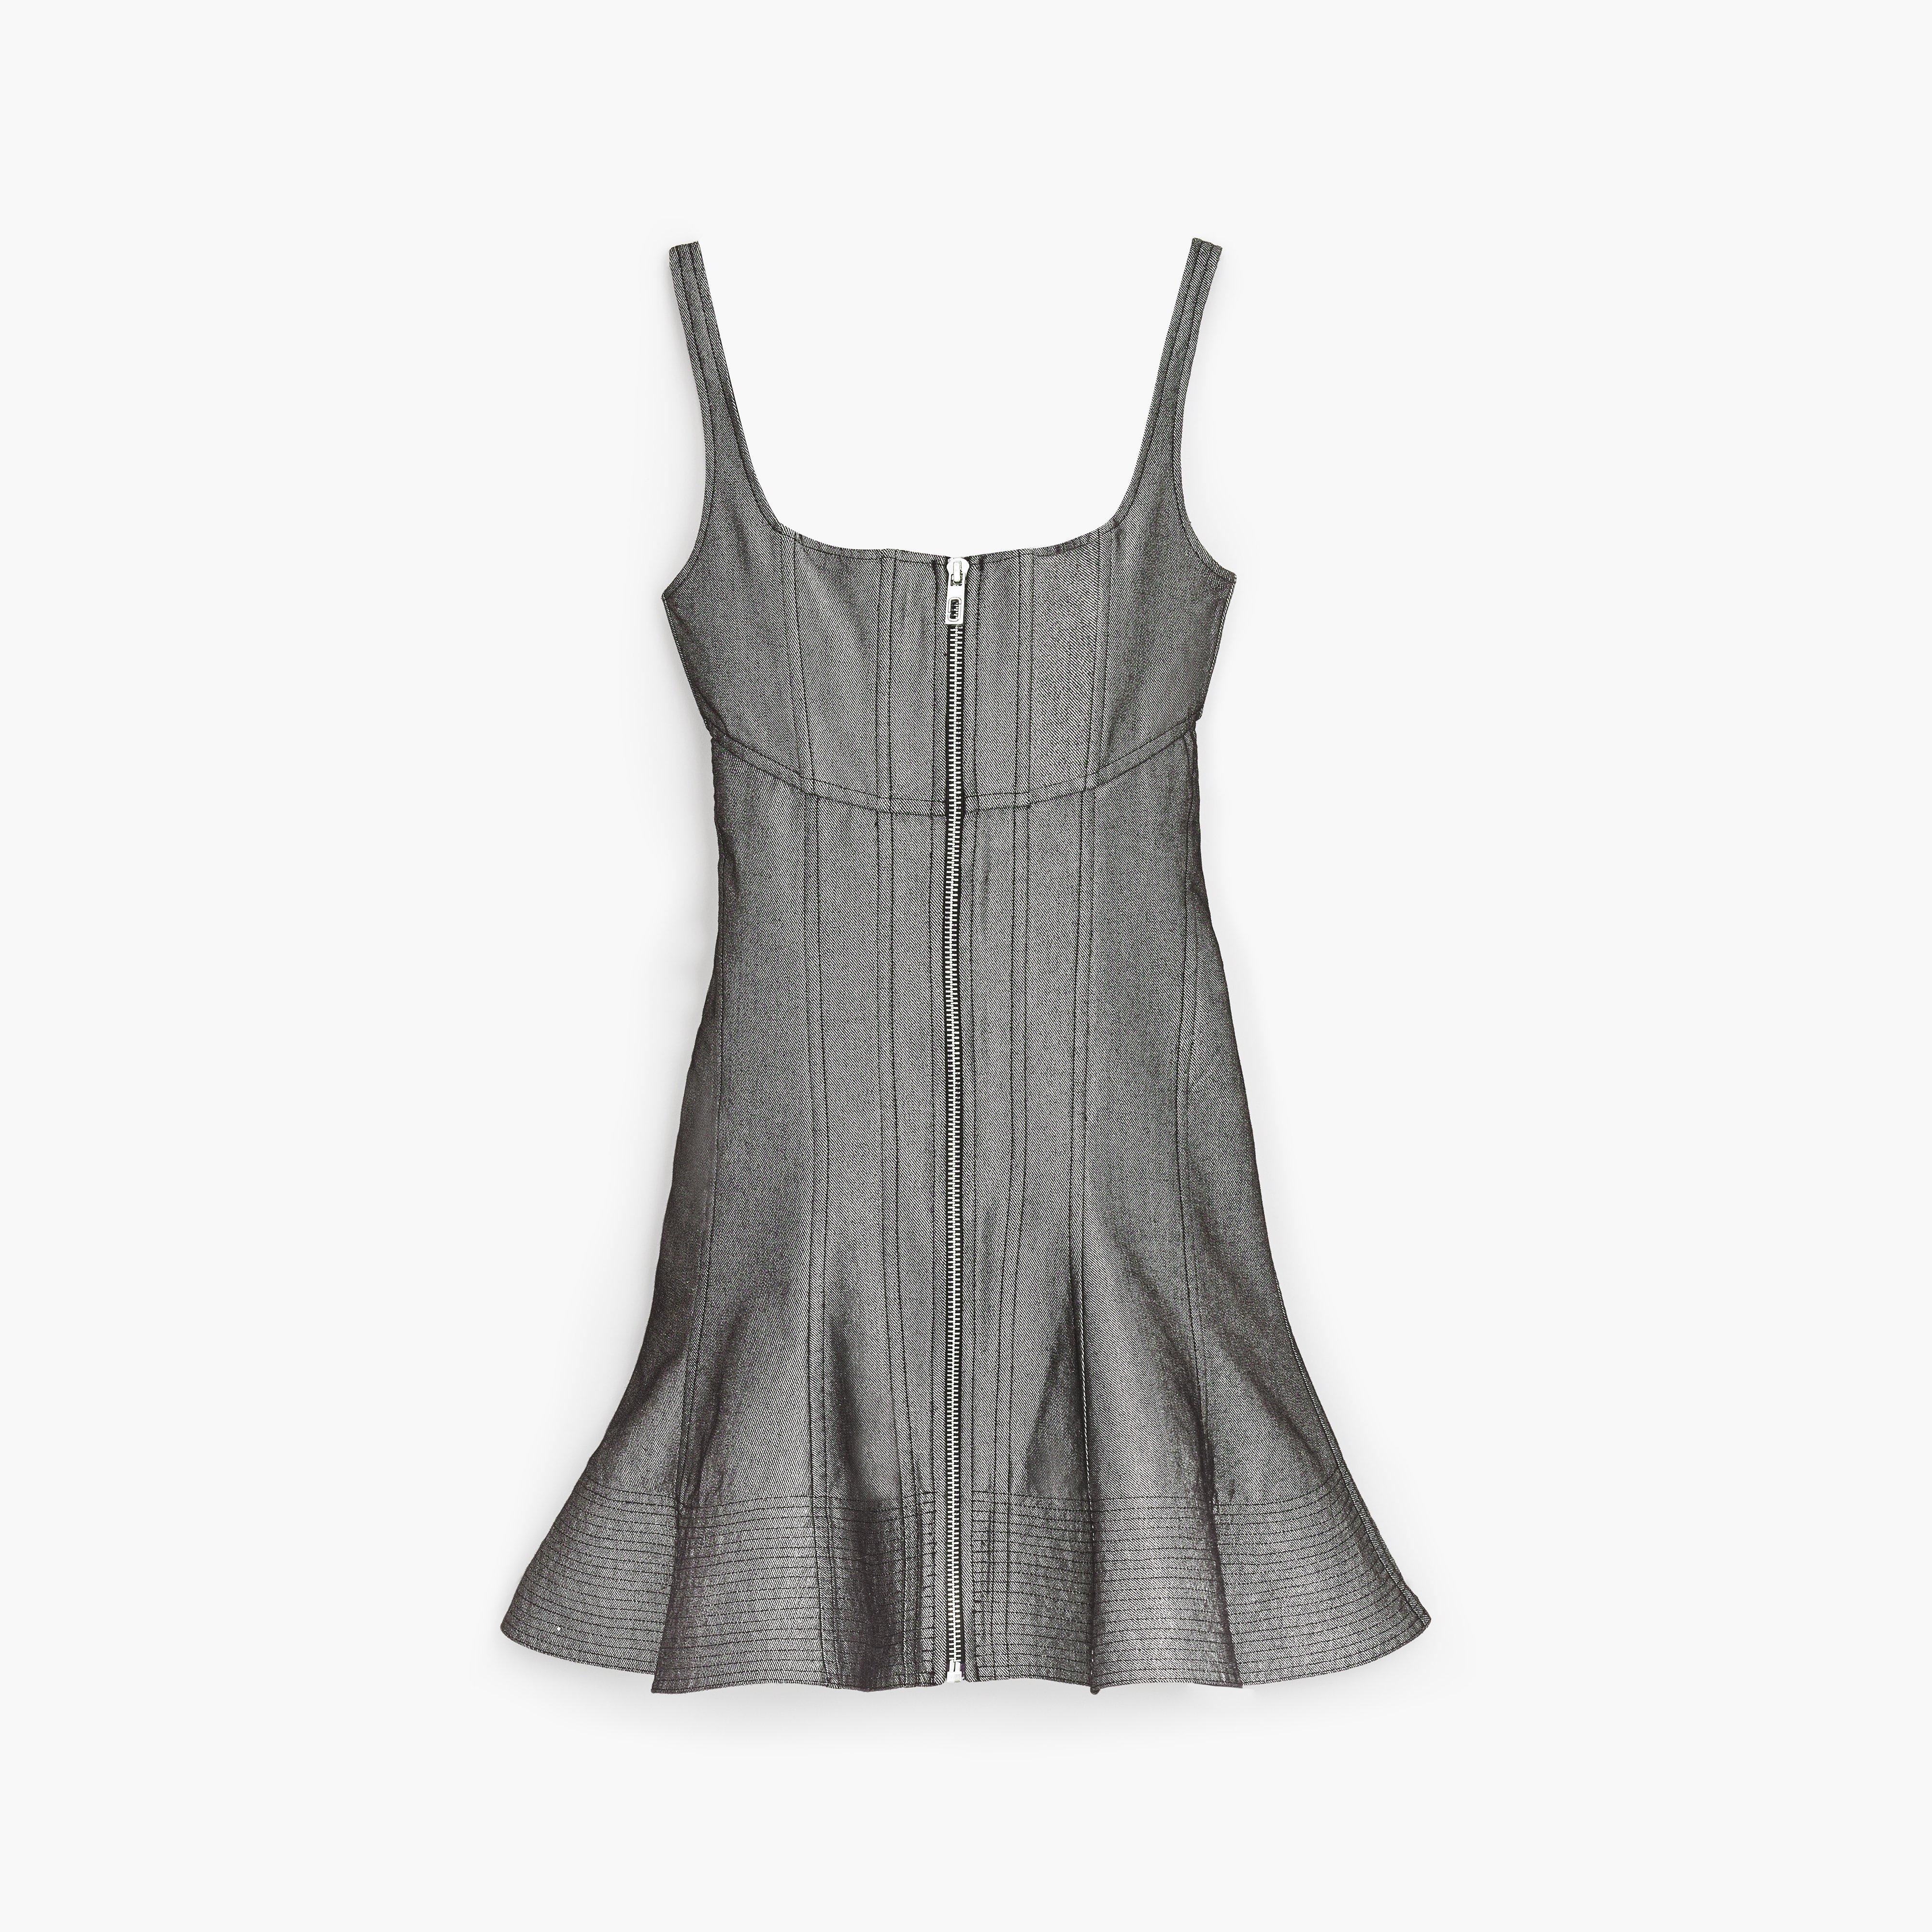 Marc by Marc jacobs The Bustier Fluted Dress,SILVER REFLECTIVE